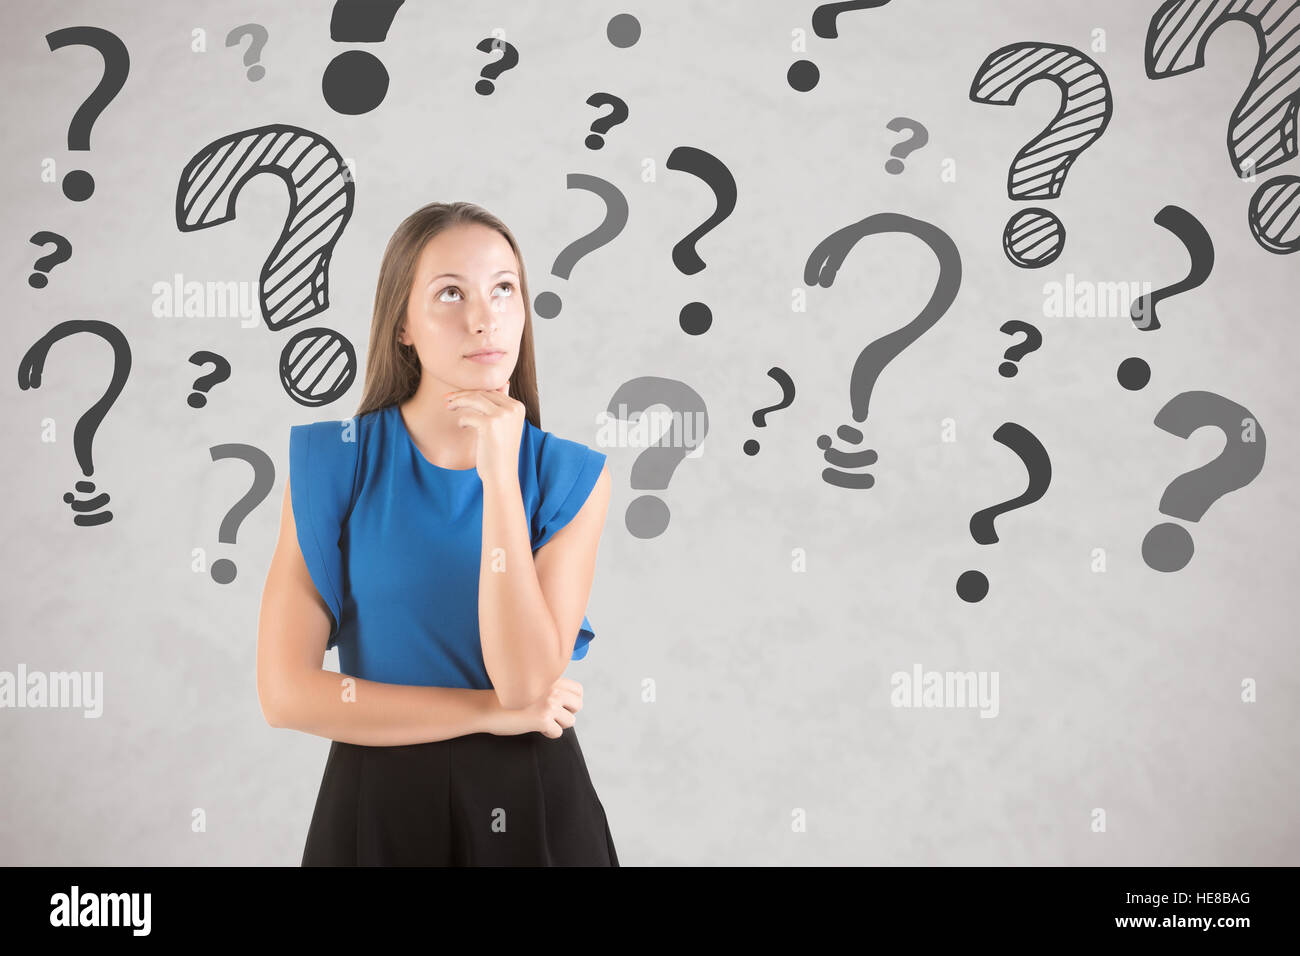 Woman thinking in a white background with a question marks around her Stock Photo